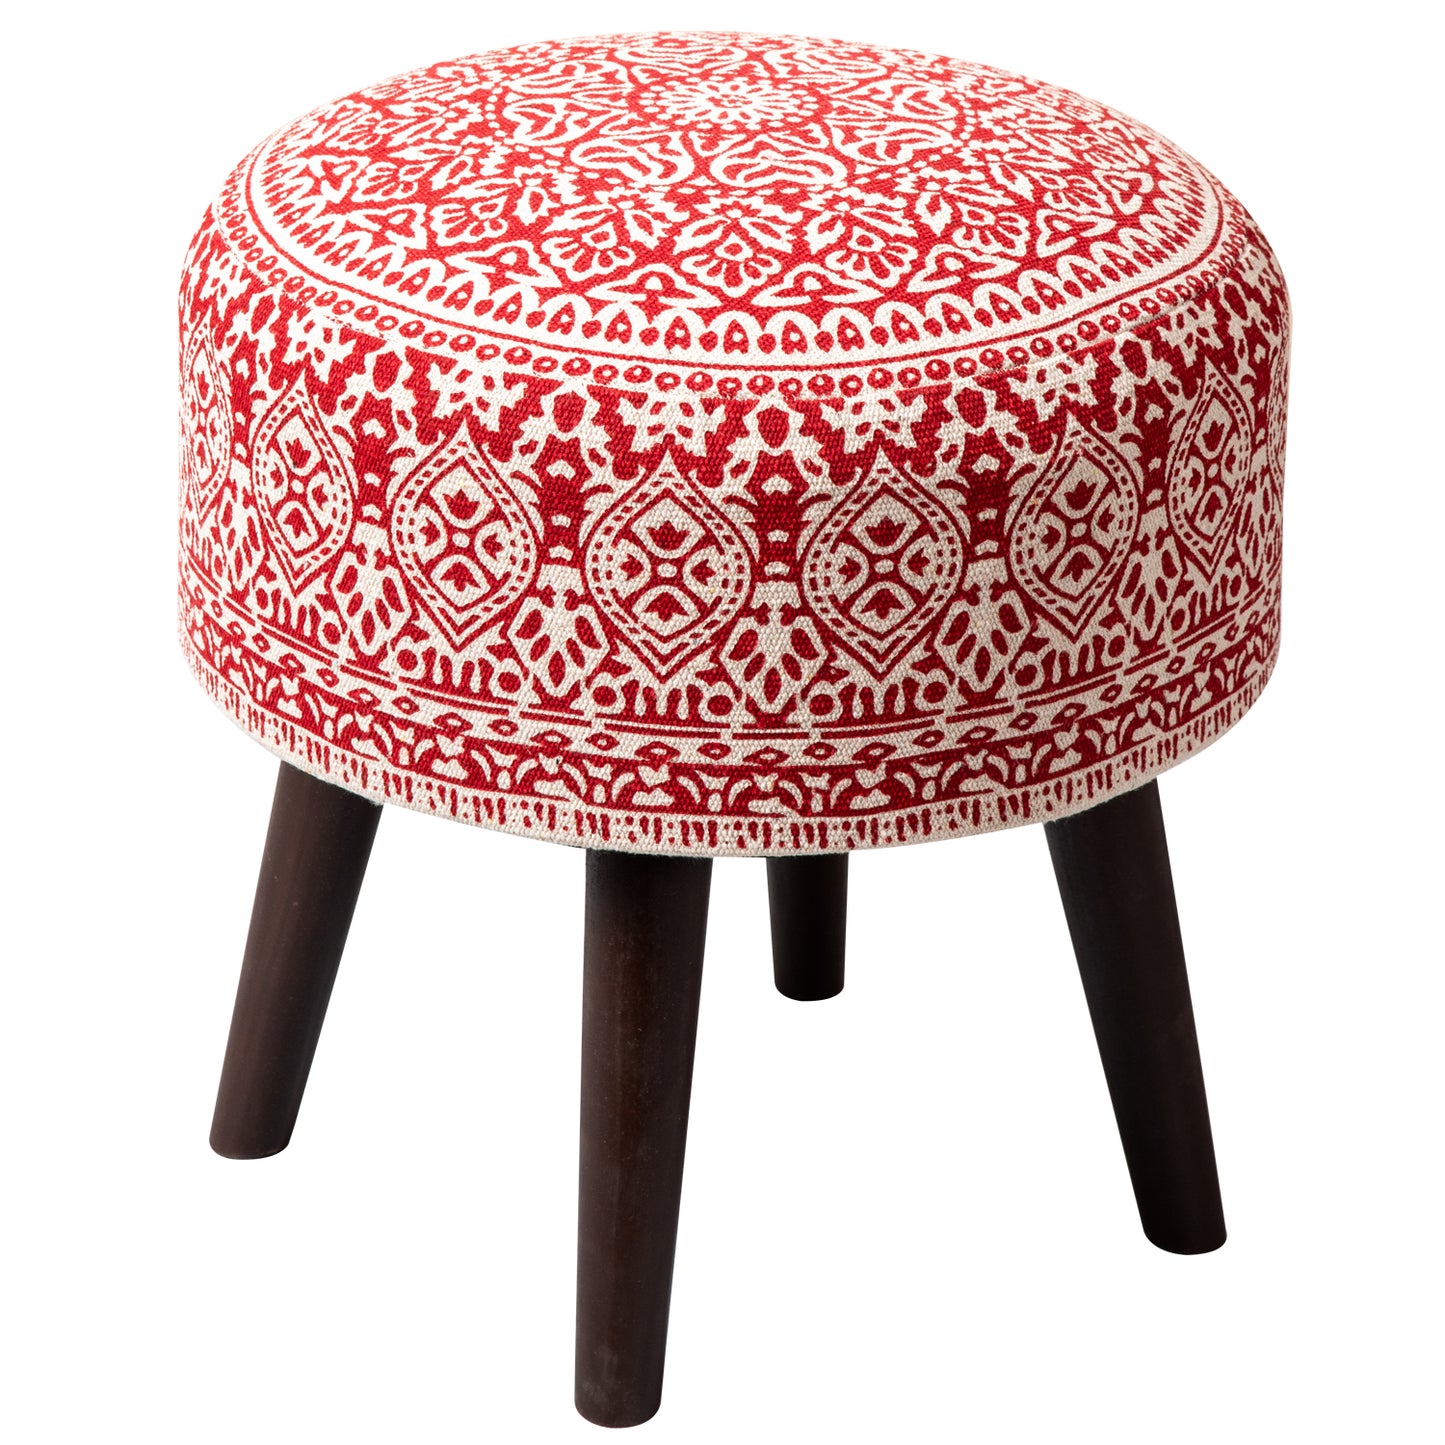 Botanic Fabric Wooden Ottoman in Red Color